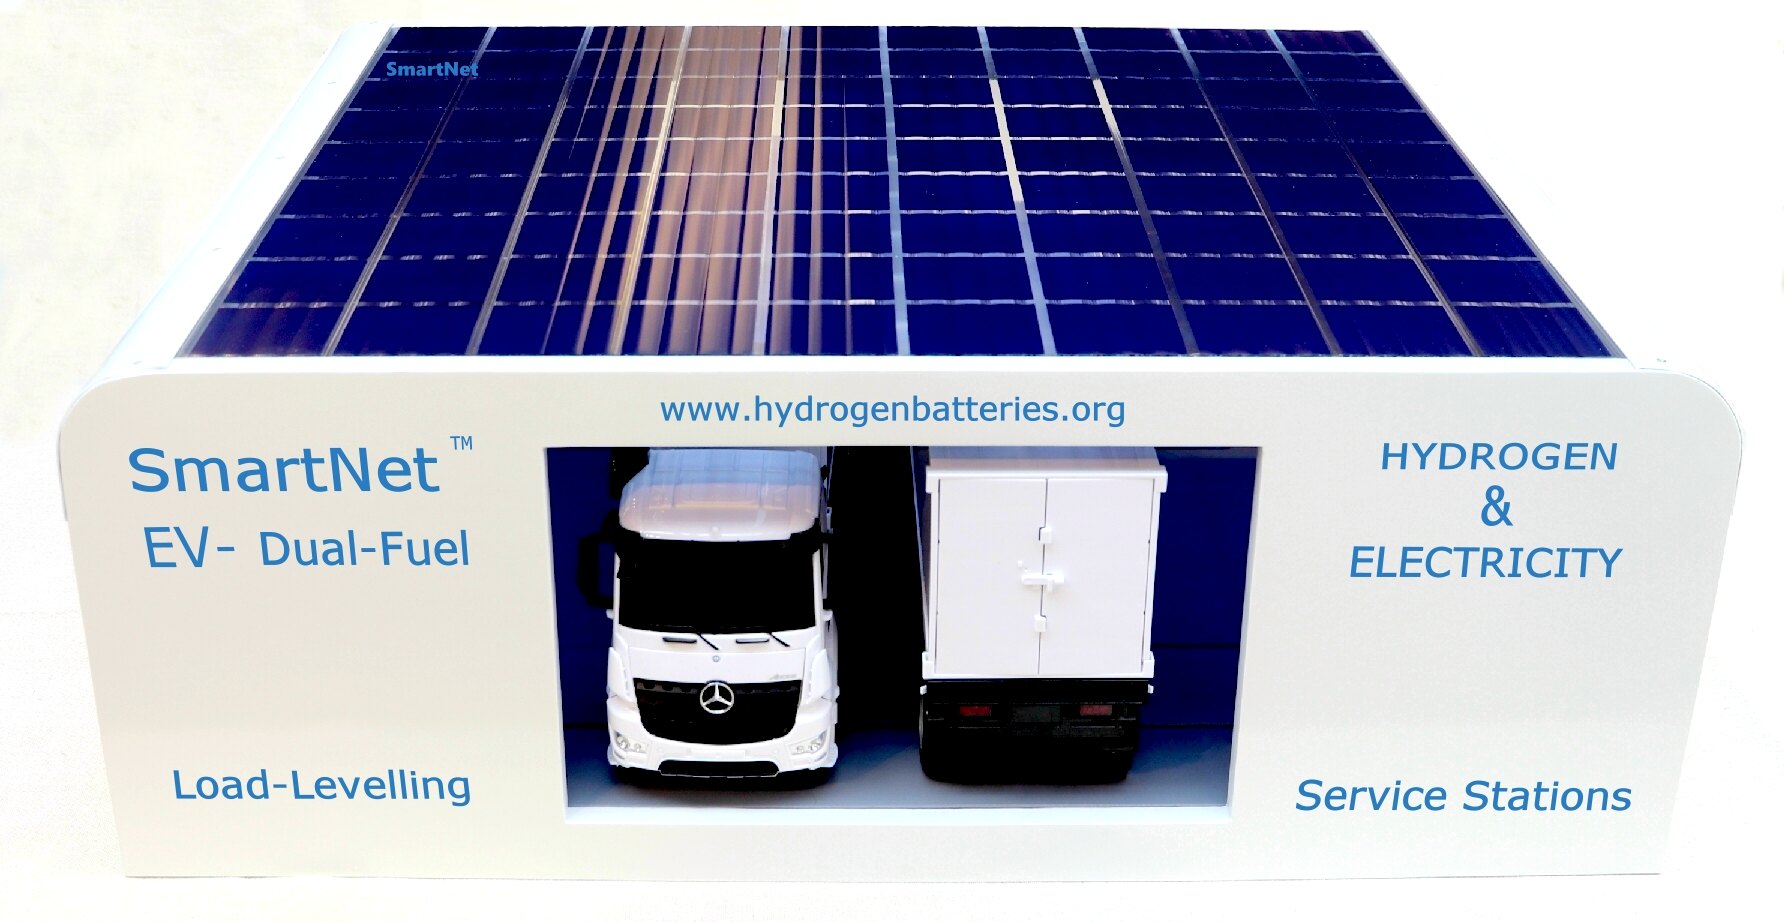 1:20 scale model of a Smarter EV service station for electricity and hydrogen